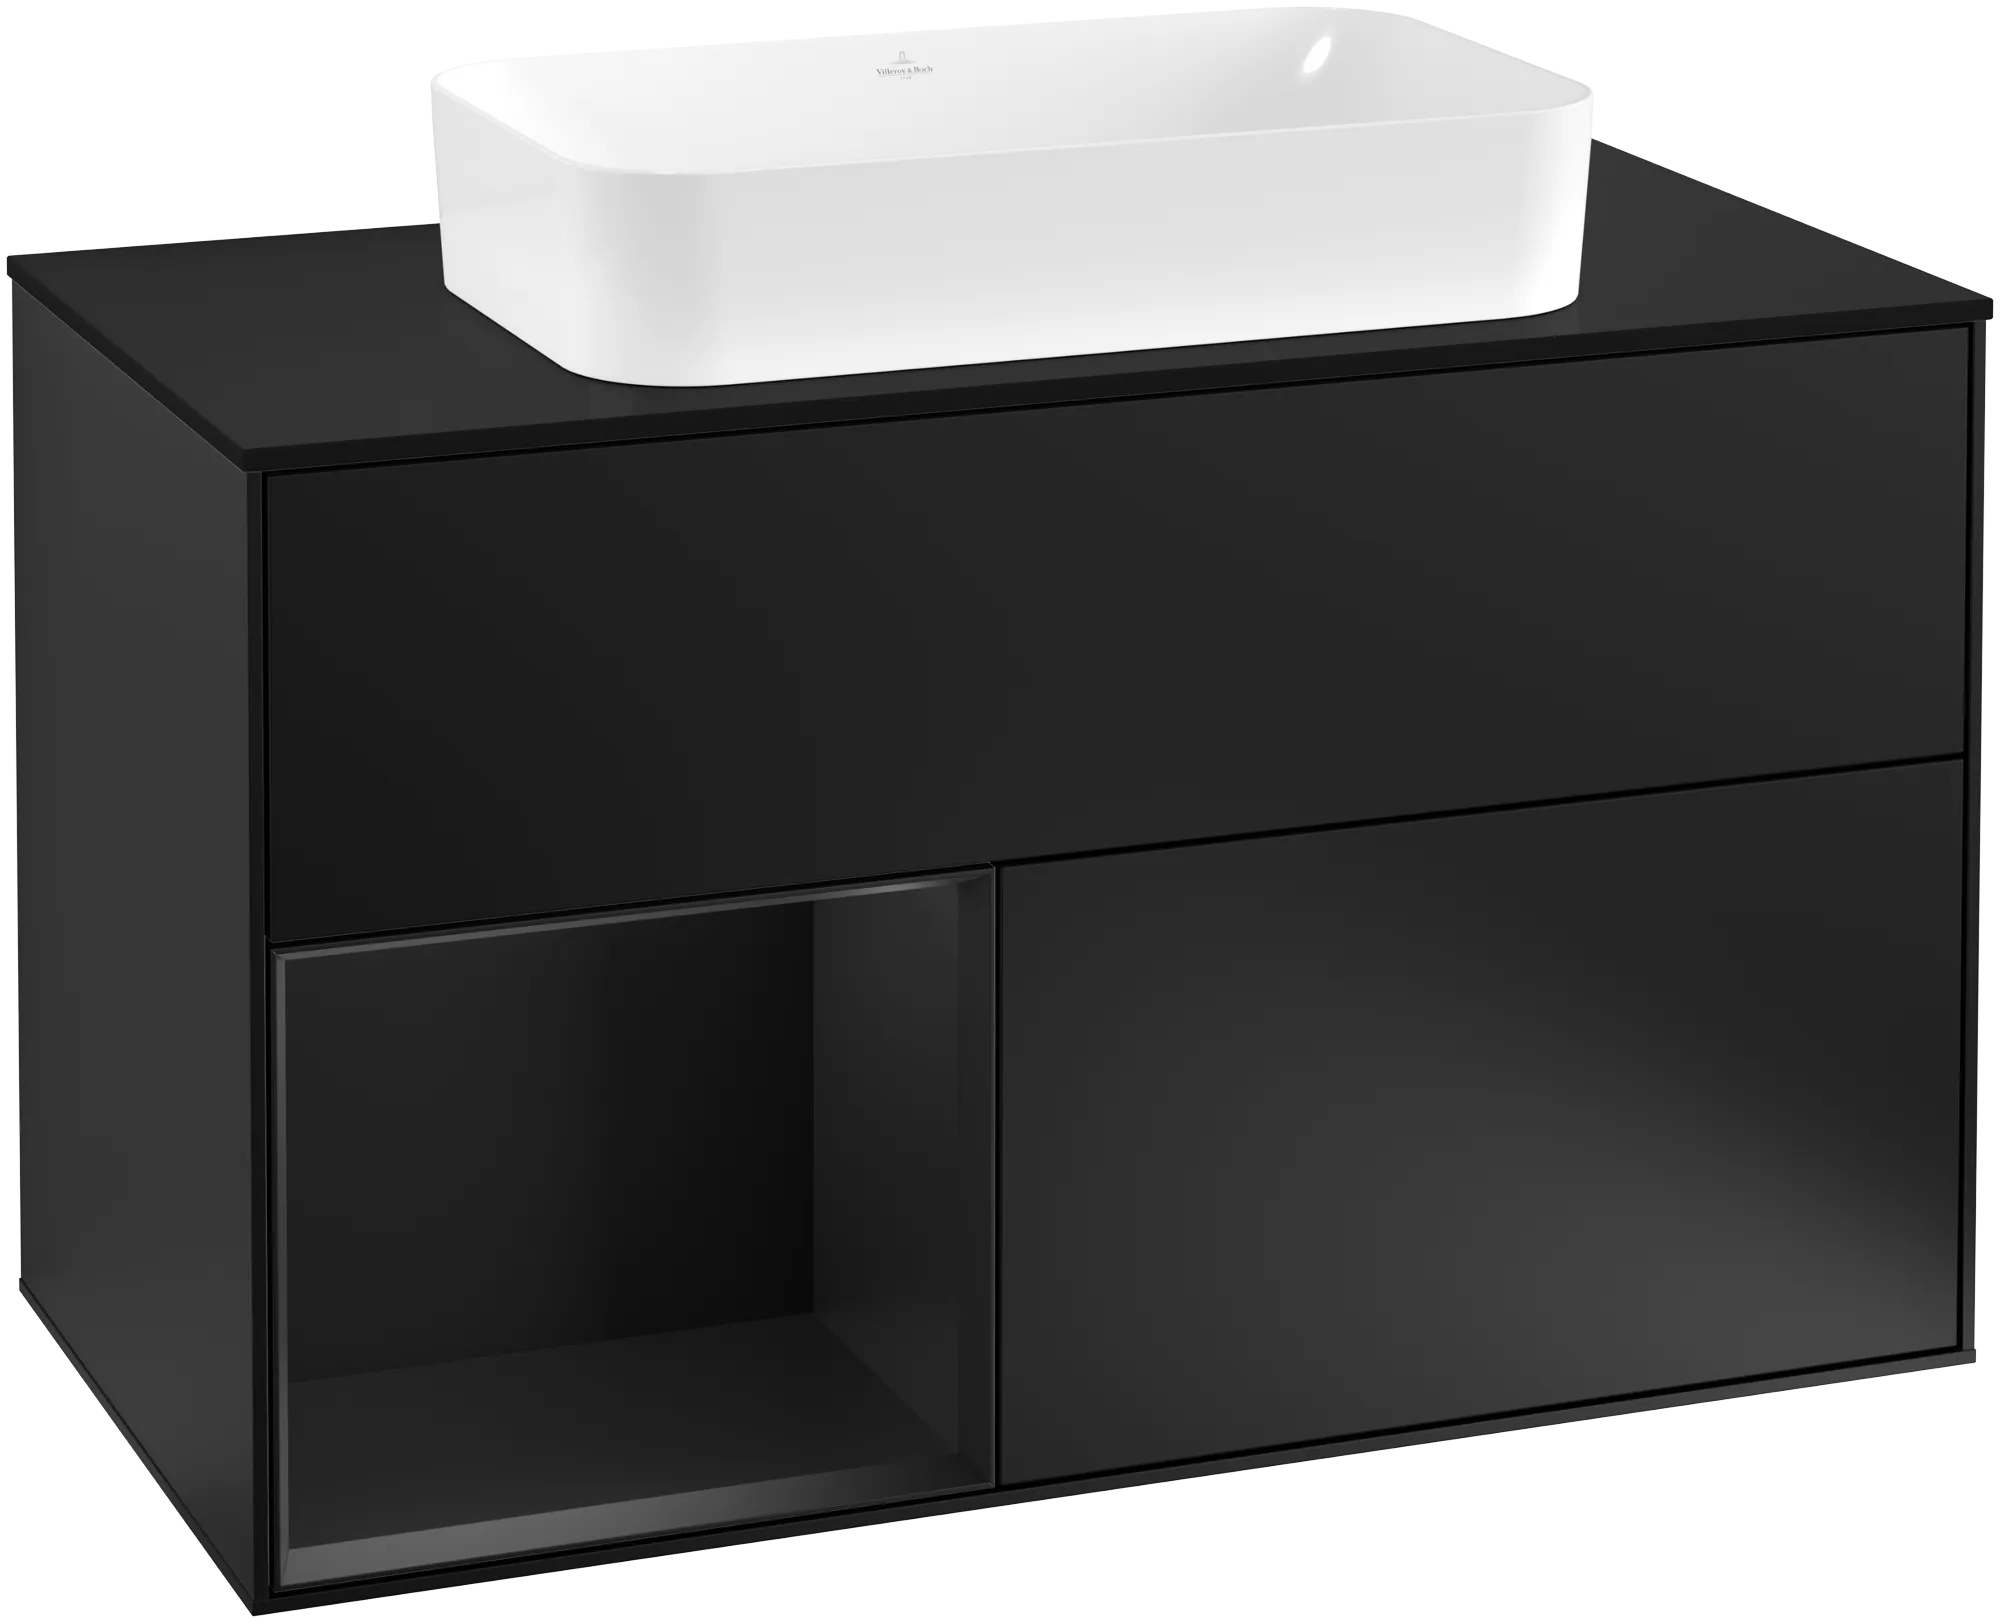 Picture of VILLEROY BOCH Finion Vanity unit, with lighting, 2 pull-out compartments, 1000 x 603 x 501 mm, Black Matt Lacquer / Black Matt Lacquer / Glass Black Matt #G242PDPD